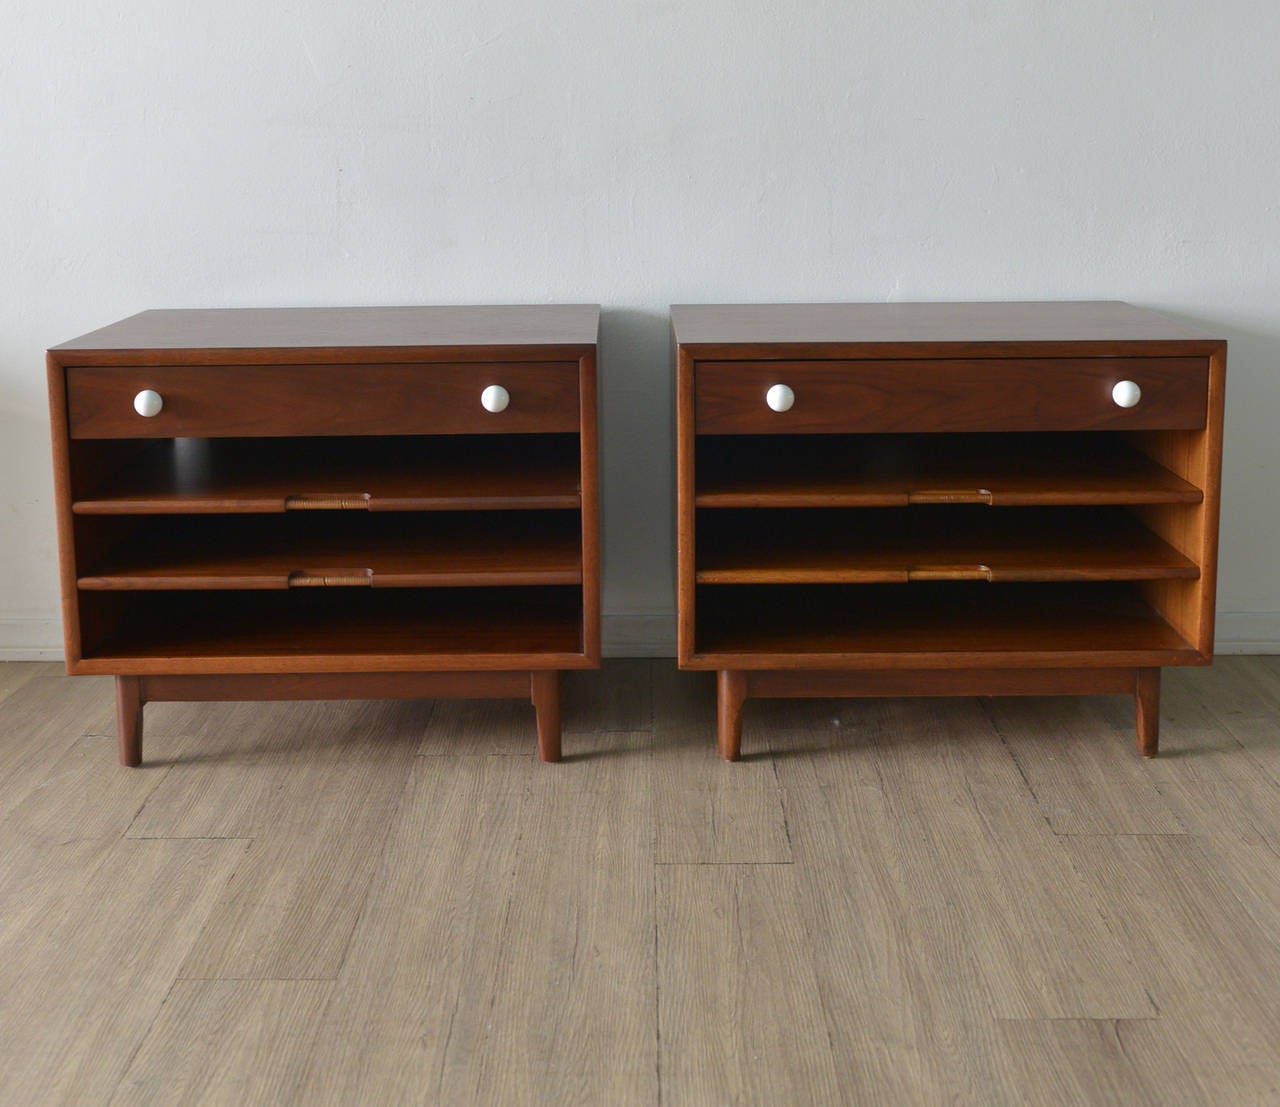 These walnut side magazine tables by Kipp Stewart for Drexel have been professionally restored and in perfect showroom condition. The pull out shelf handles are wrapped in cane for a nice finish. Unique and very functional pull out drawers for